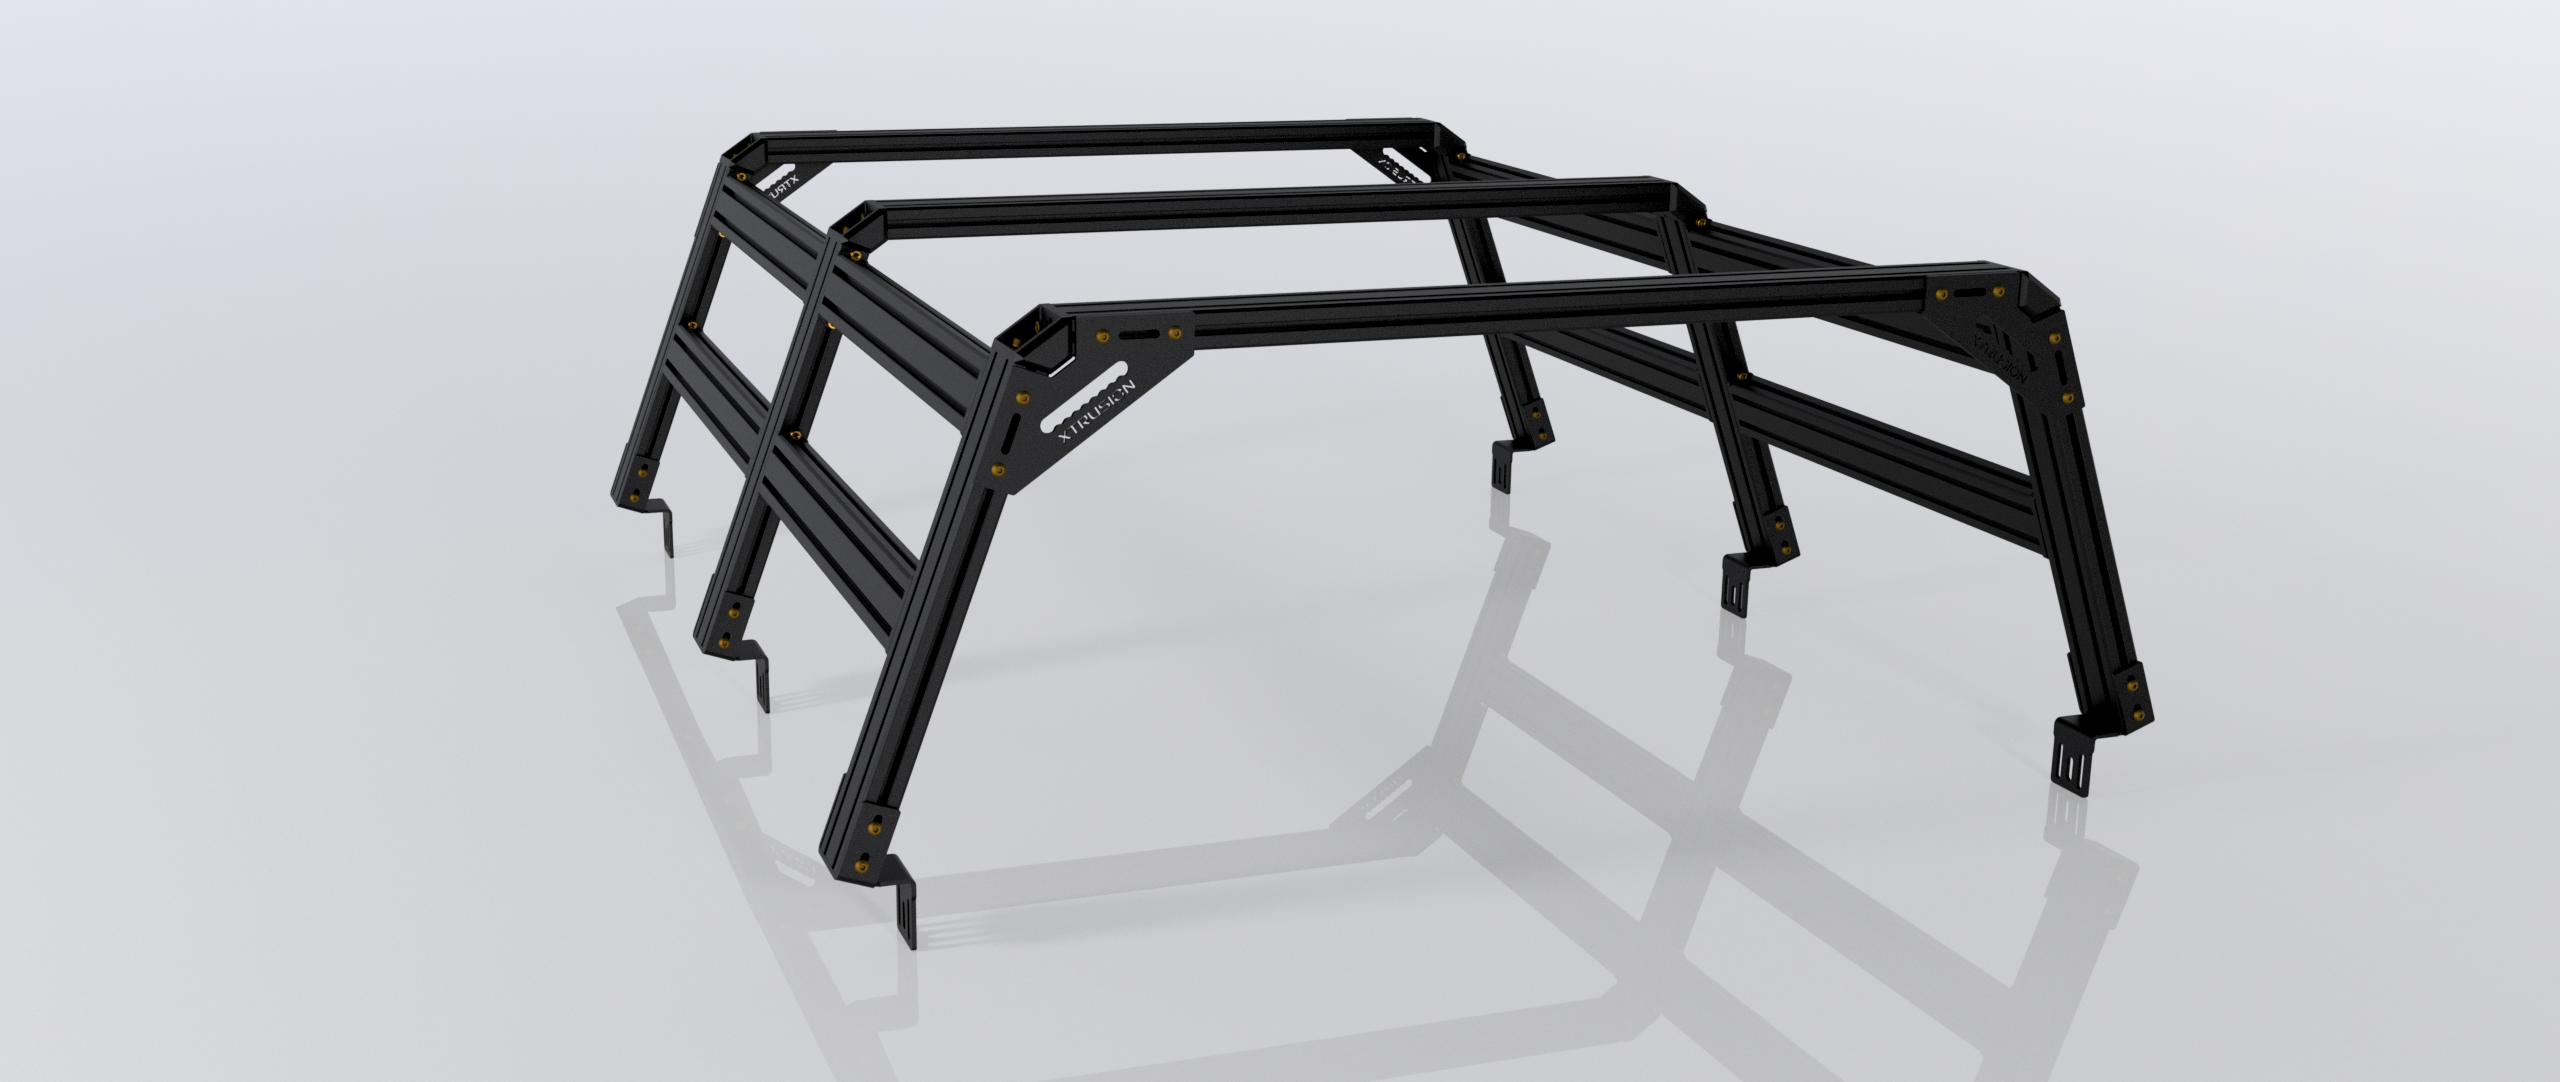 XTR3 Bed Rack for RAM 1500 Straight Bed